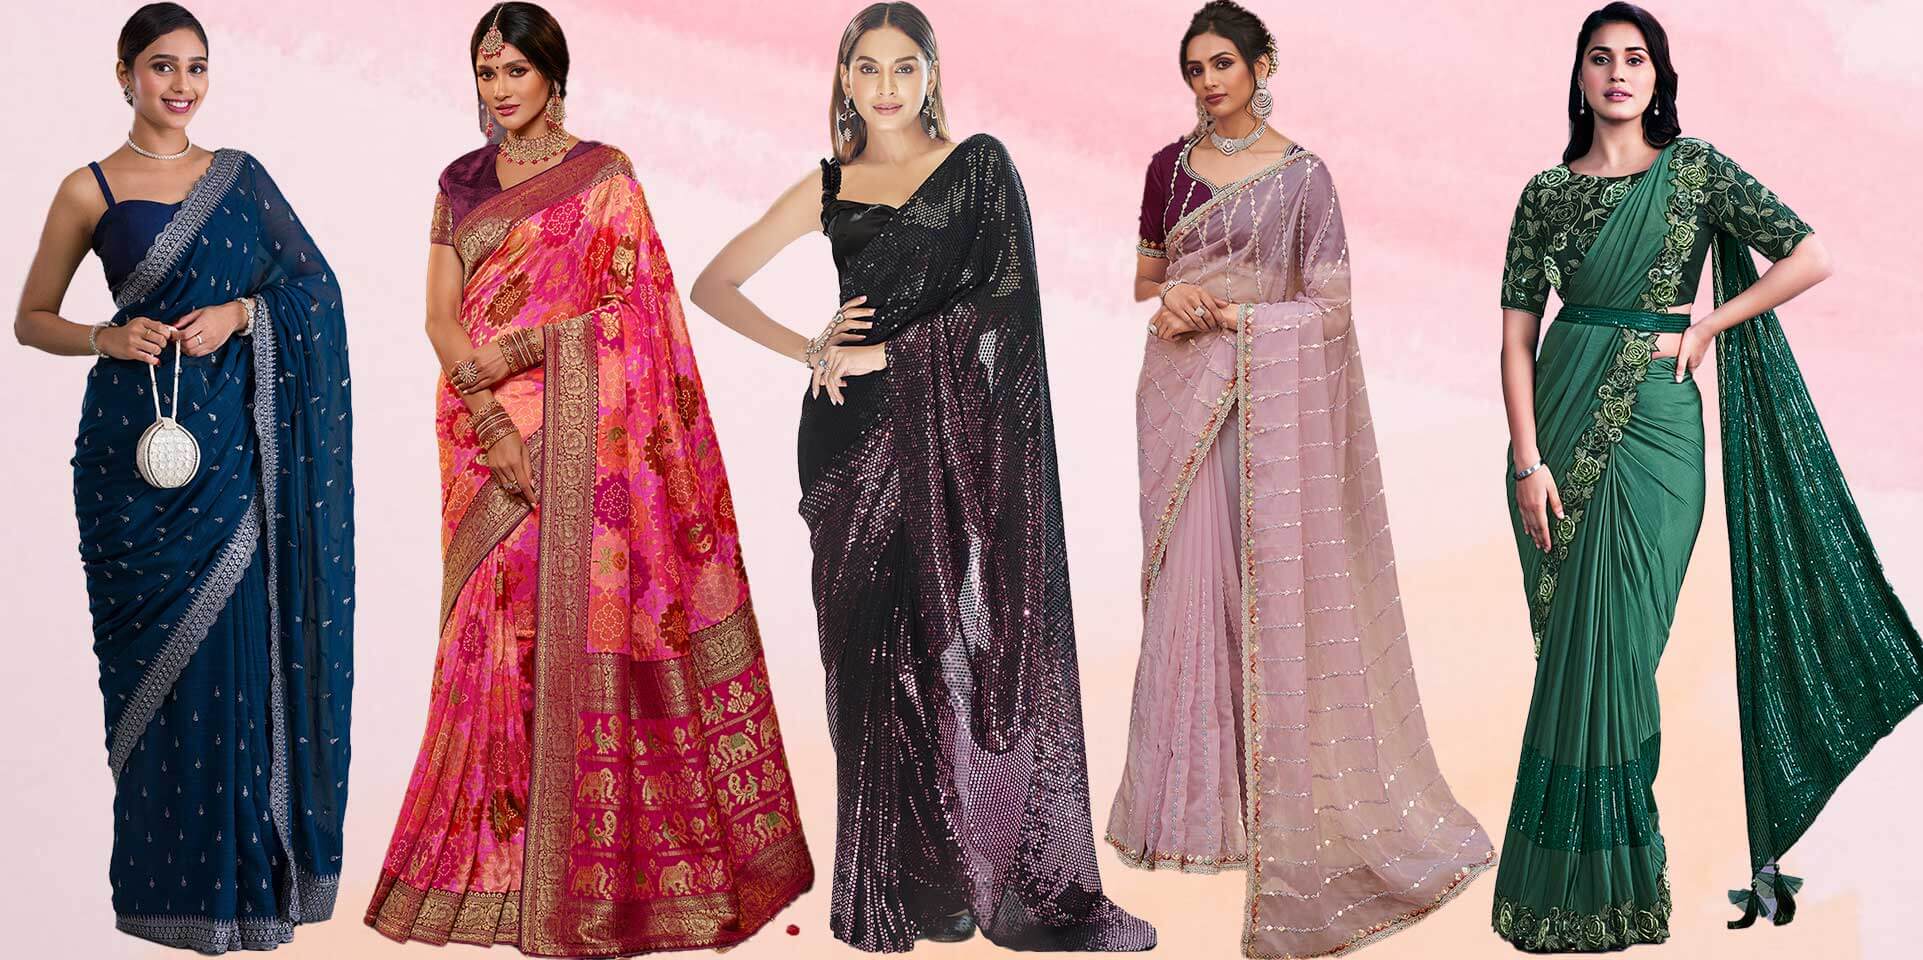 Best Indian Sarees Shopping Guide in the USA